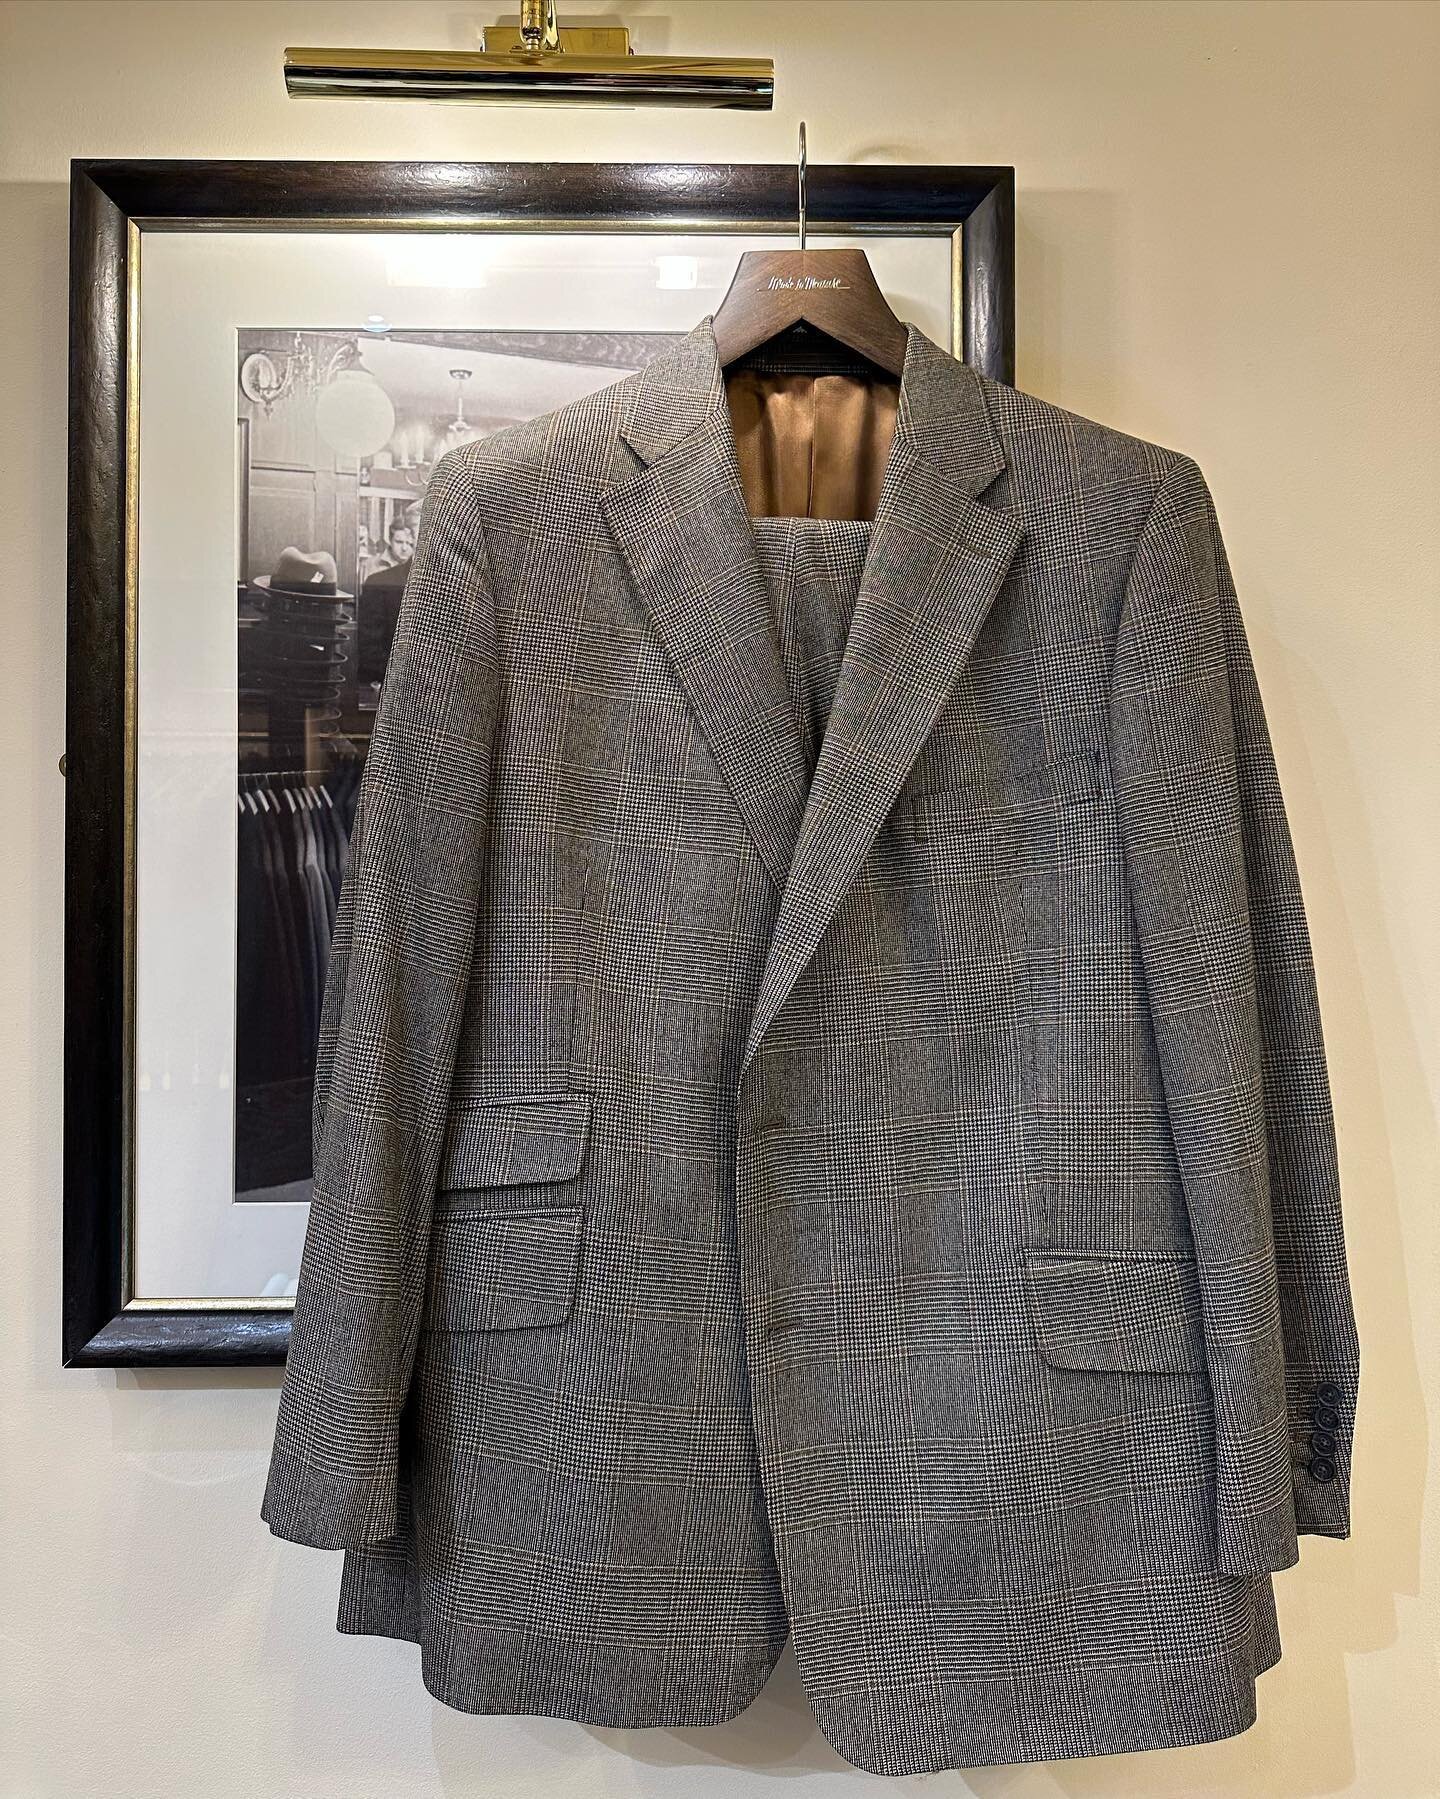 Copperfield Gallery — Copperfield Tailors